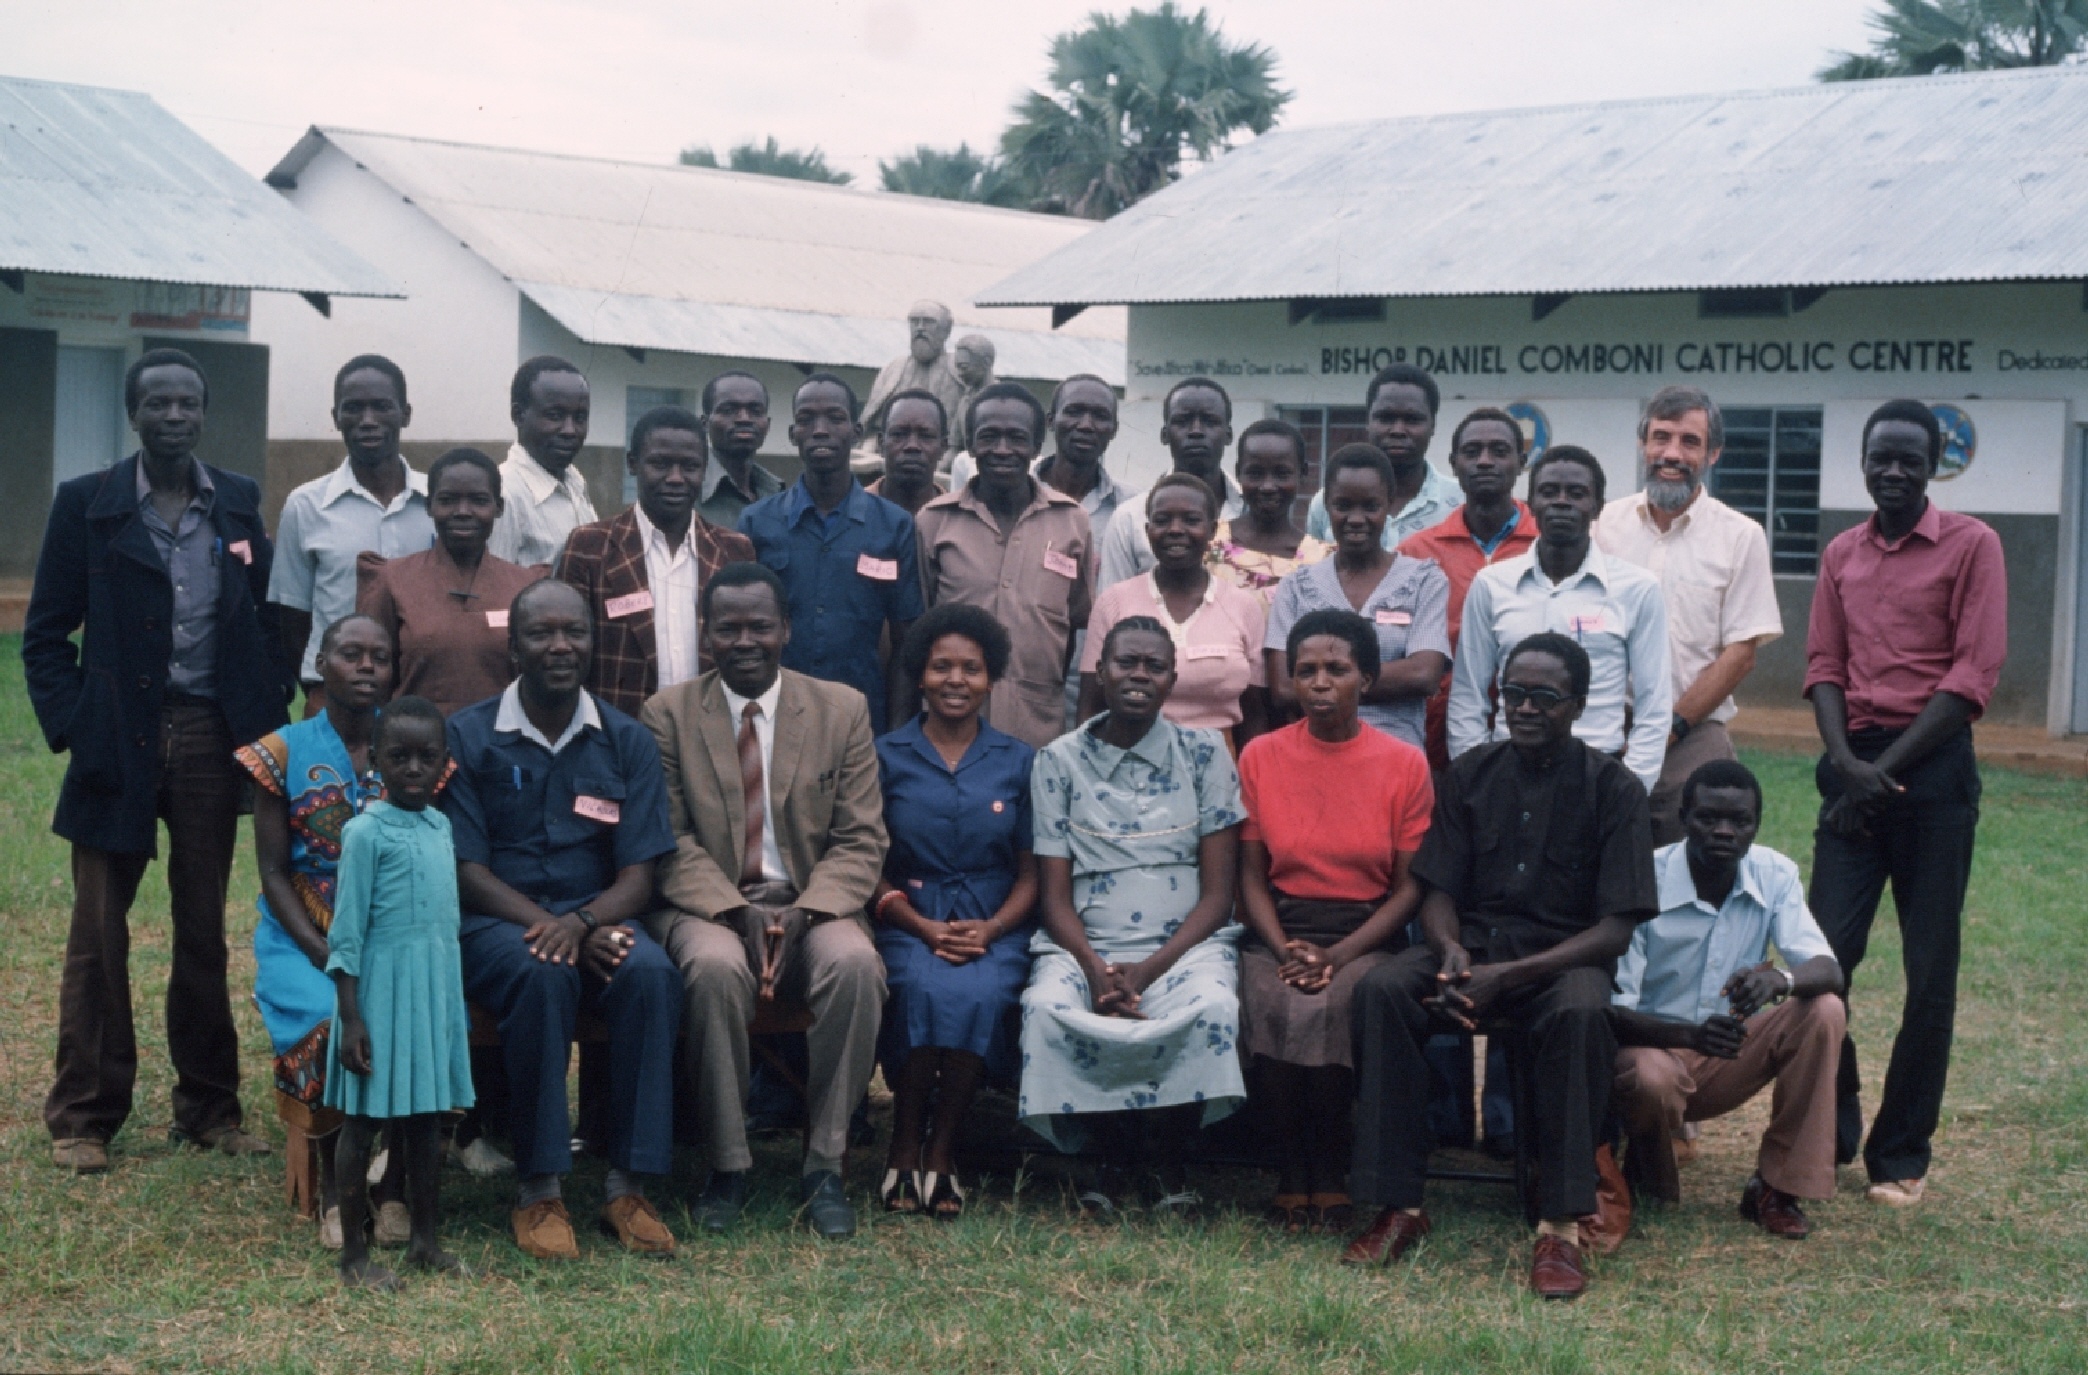 Filippo Ciantia - 1st Training of Trainers of Community Health Workers. Trainers selected from health staff of Kitgum District. Among others we recognize: Cons Tokwiny Olal, Nars Oyo-Odoch, Vincent Oyet, Robert Odongo, Thomas Odong, Oryang Okoddi, Anjelina Angut, Nicholas Opoka